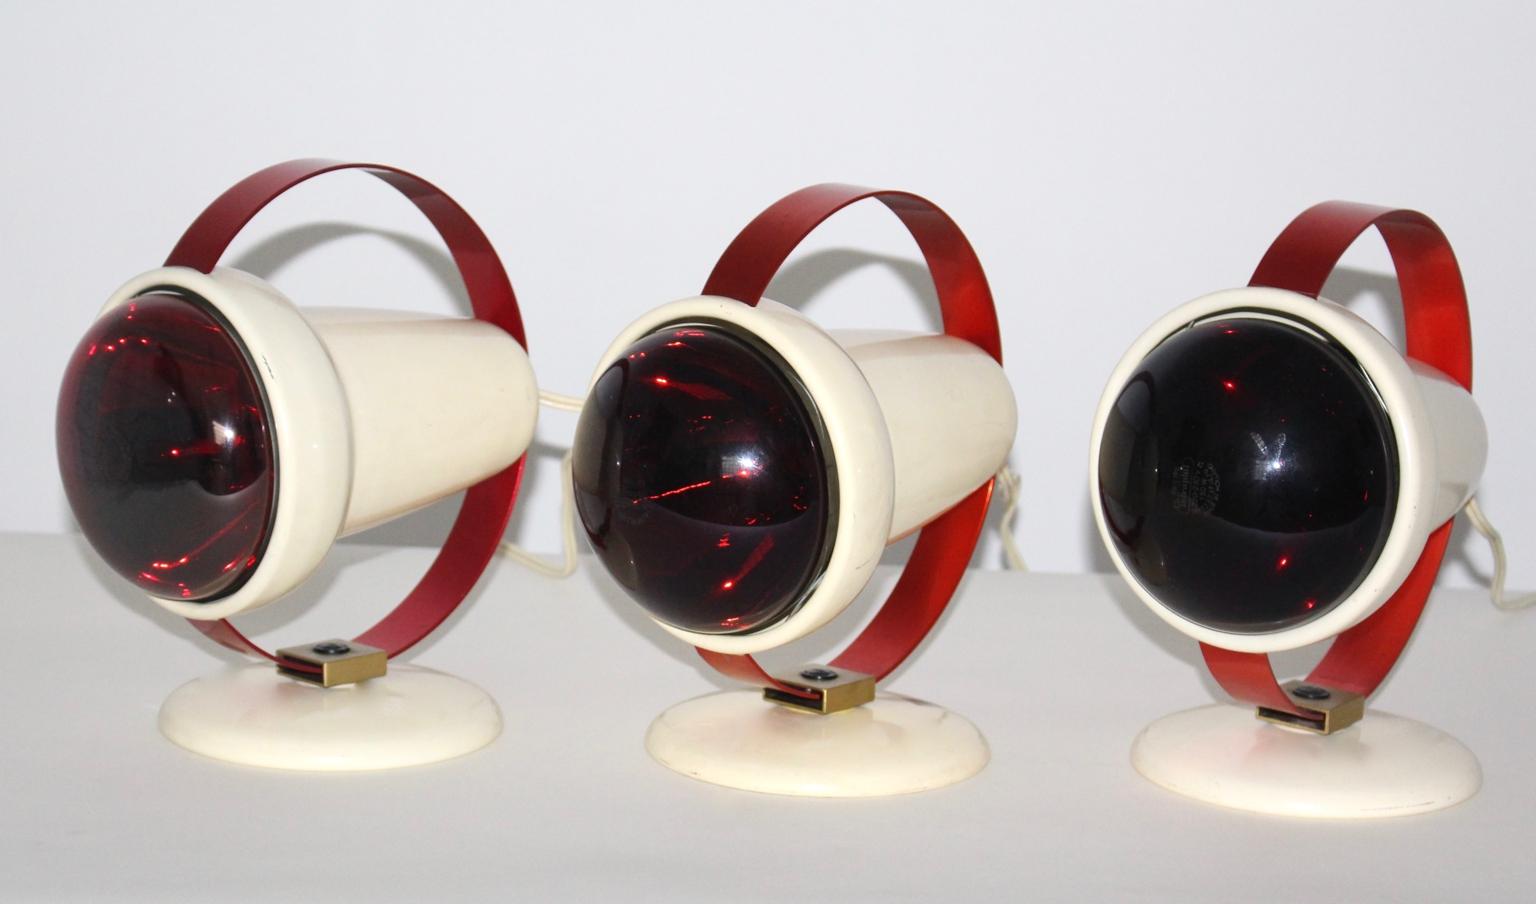 These three heater lamps were designed by the French architect and designer Charlotte Perriand and produced by Philips Netherlands.
The base was white lacquered and a red lacquered ring for supporting. Also the lamps are adjustable from right to